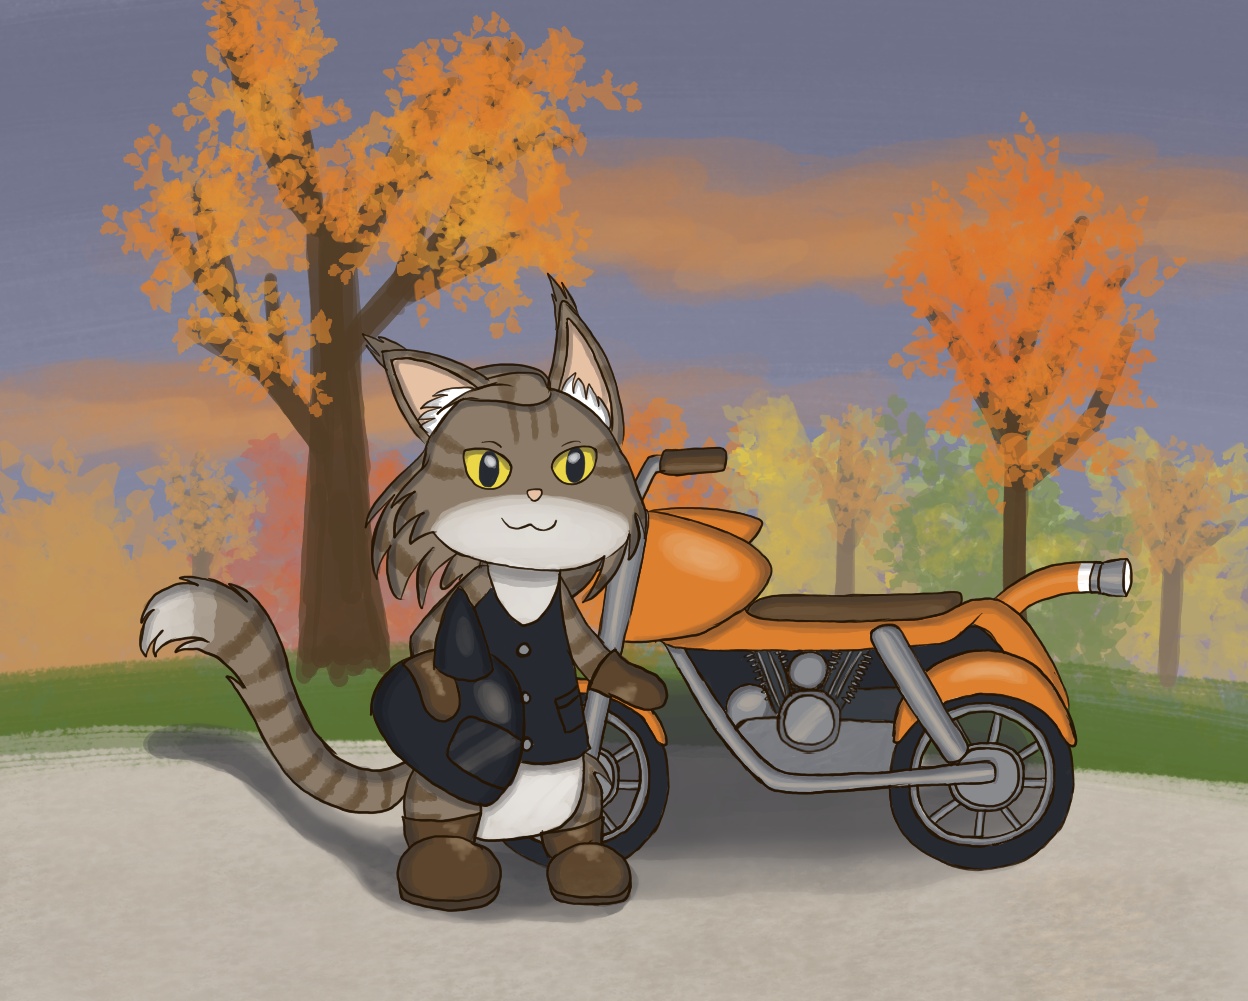 Image description: A digital drawing of a stylized long-haired brown and white tabby cat wearing a biker vest, gloves and boots, and is holding a helmet. The cat is standing by a motorcycle that has a few extra design elements which include a tail light modeled after a cat’s tail. The scenery is a sunset along a nature trail; the trees have mostly orange foliage but there is also foliage with red, yellow and green hues.